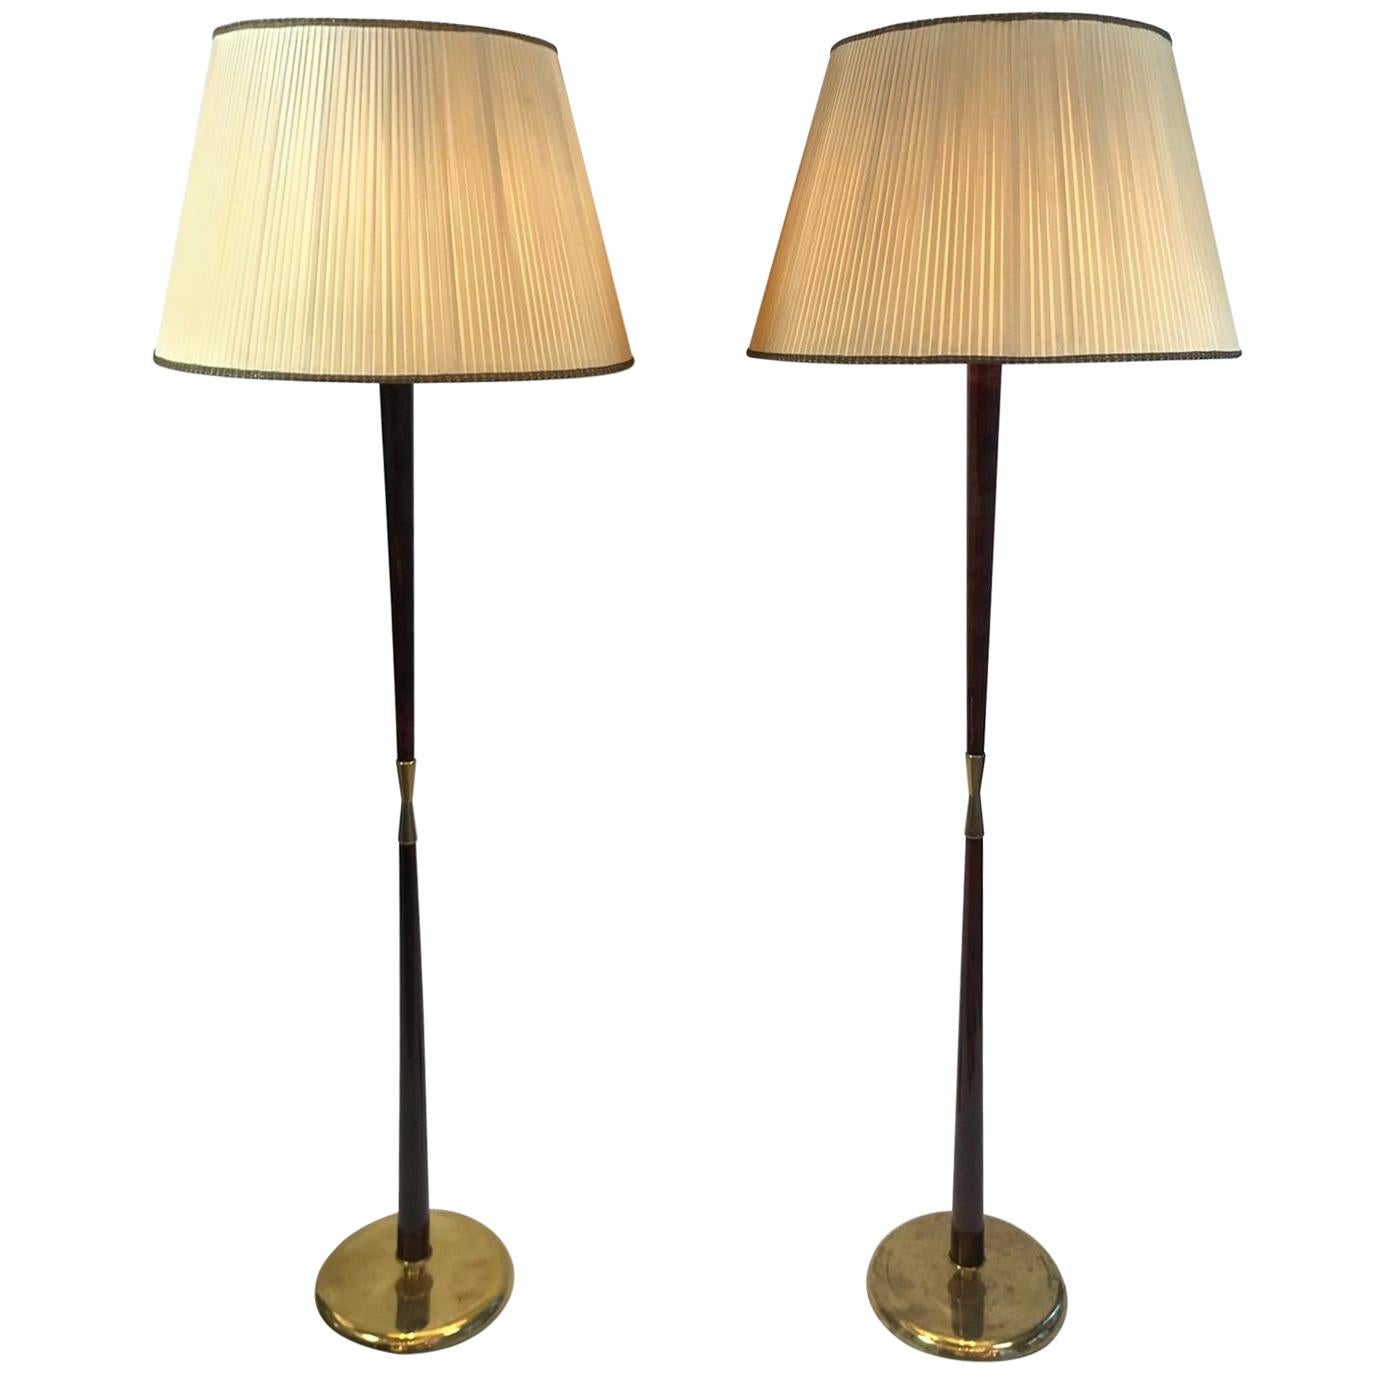 Stilnovo Early Design Pair of Floor Lamps in Brass and Mahogany